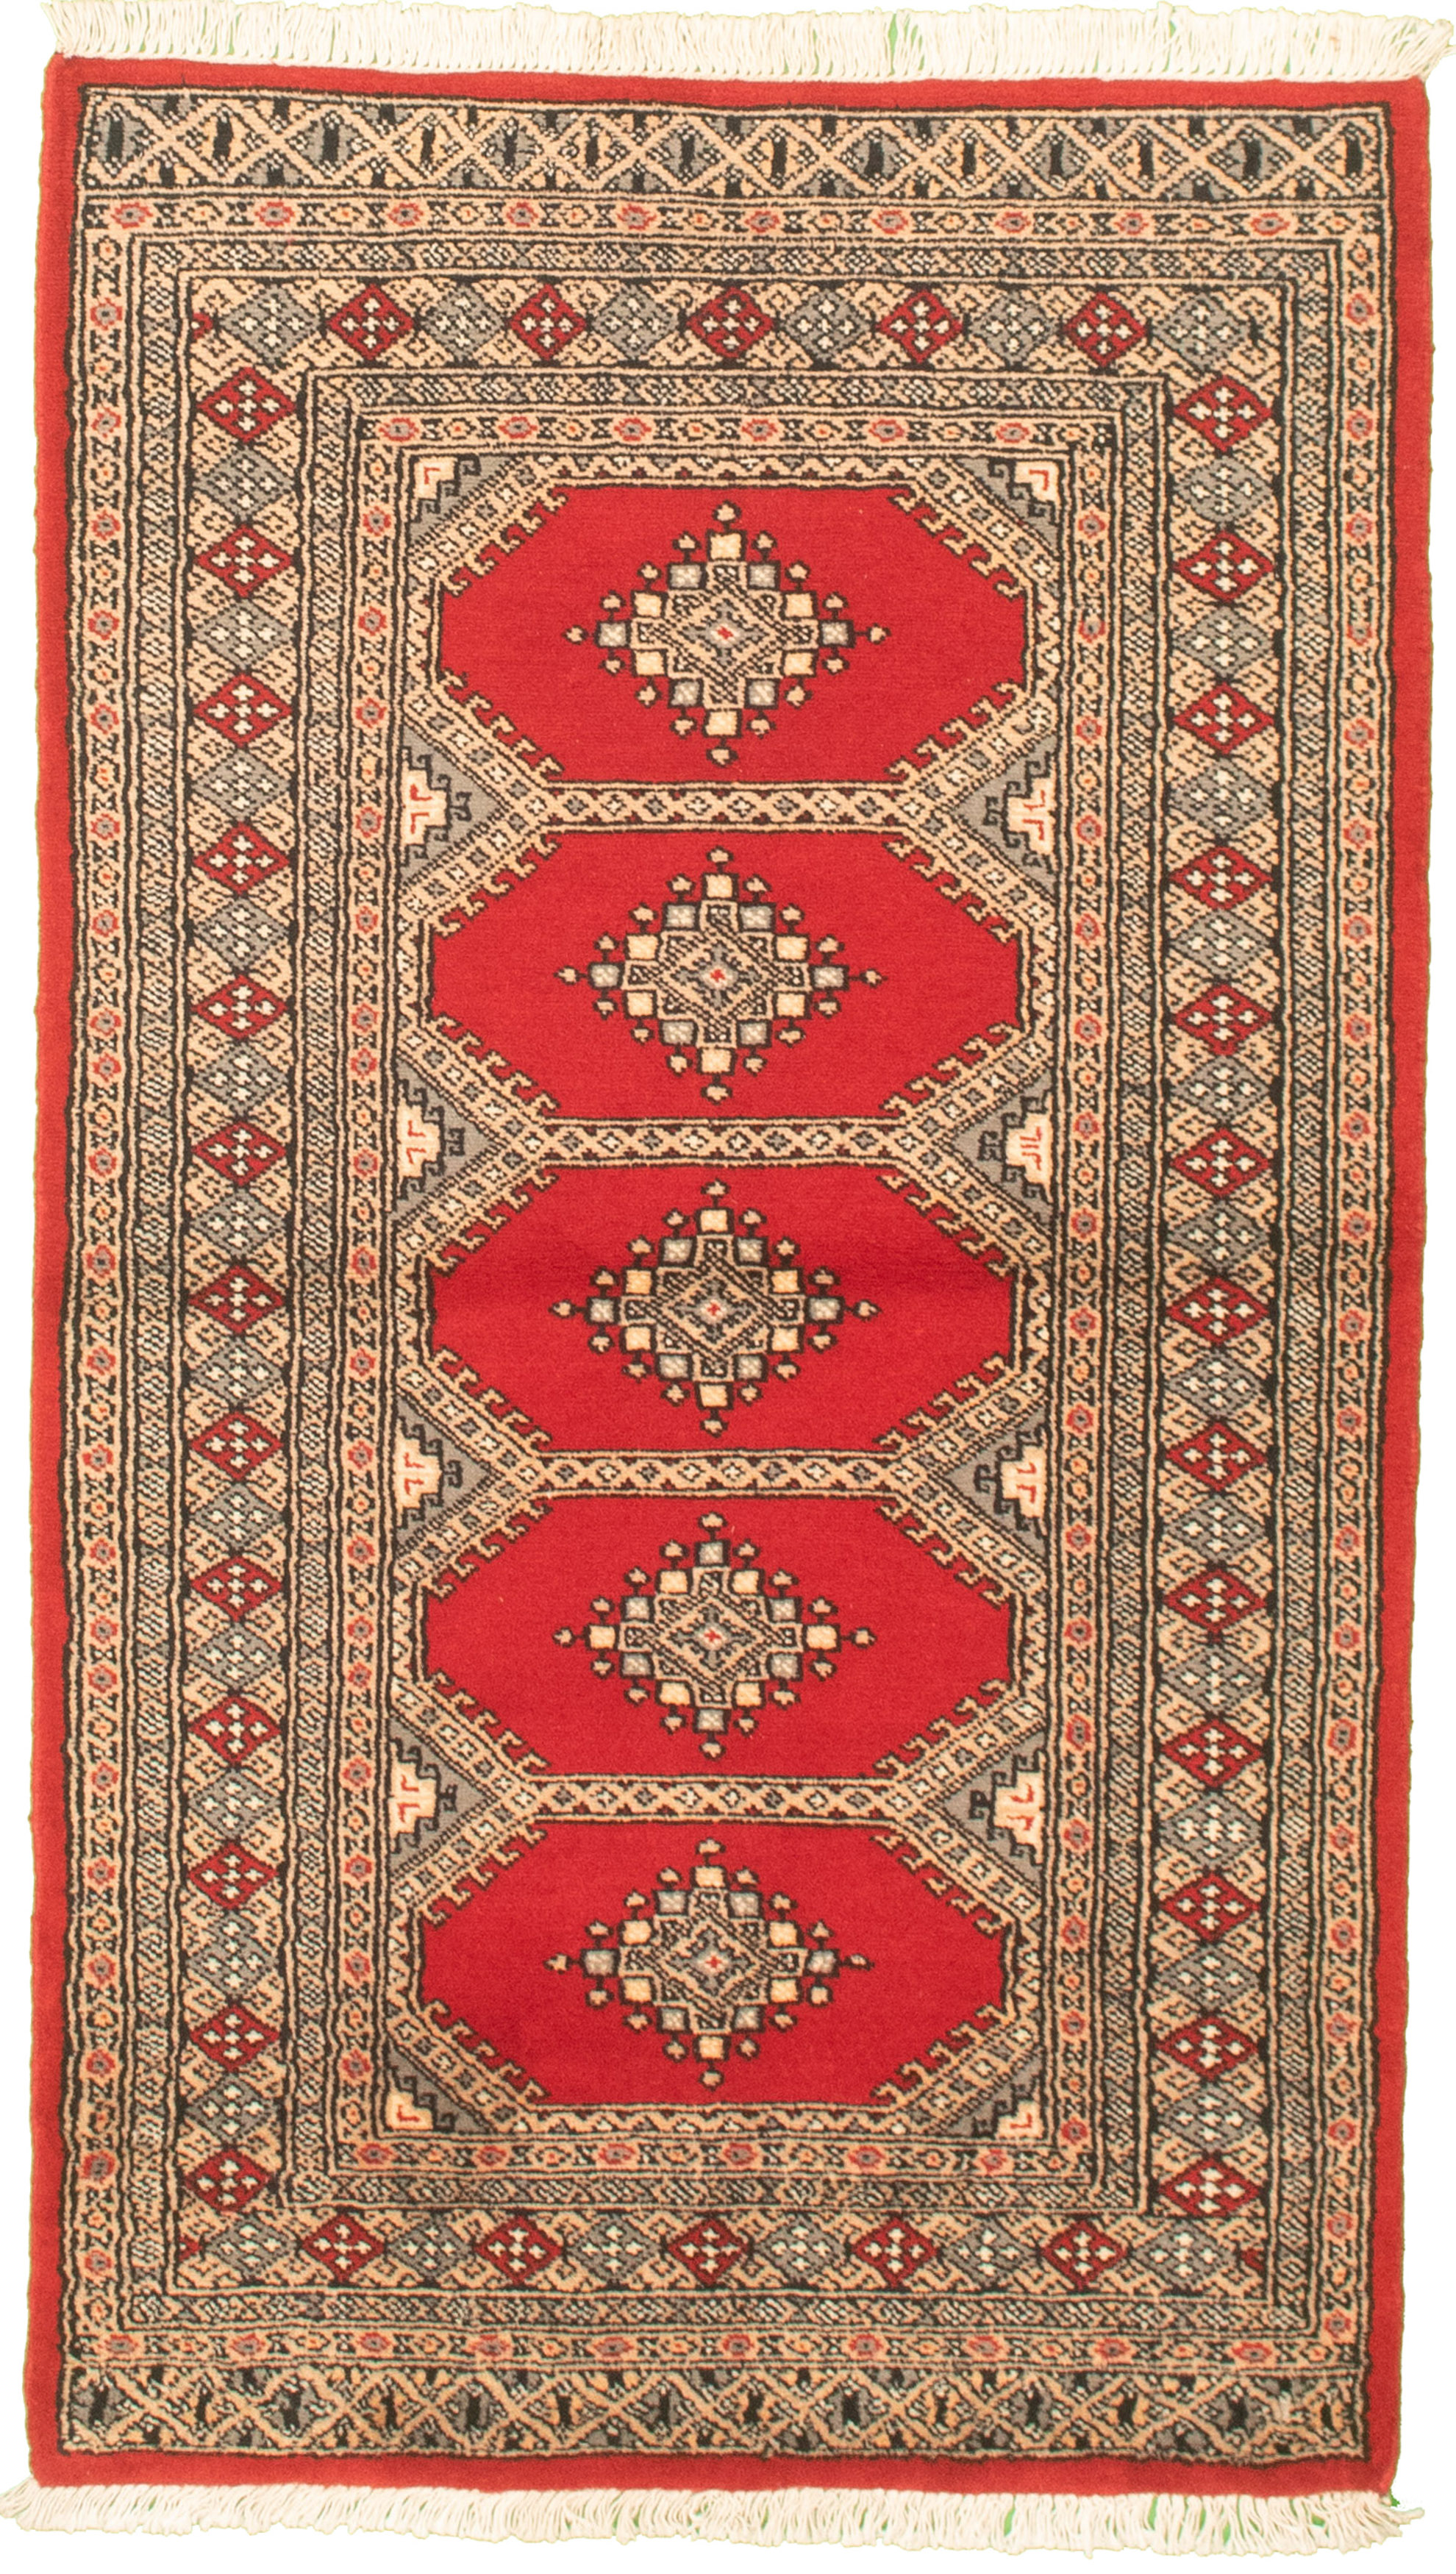 Hand-knotted Finest Peshawar Bokhara Red Wool Rug 3'0" x 5'4"  Size: 3'0" x 5'4"  